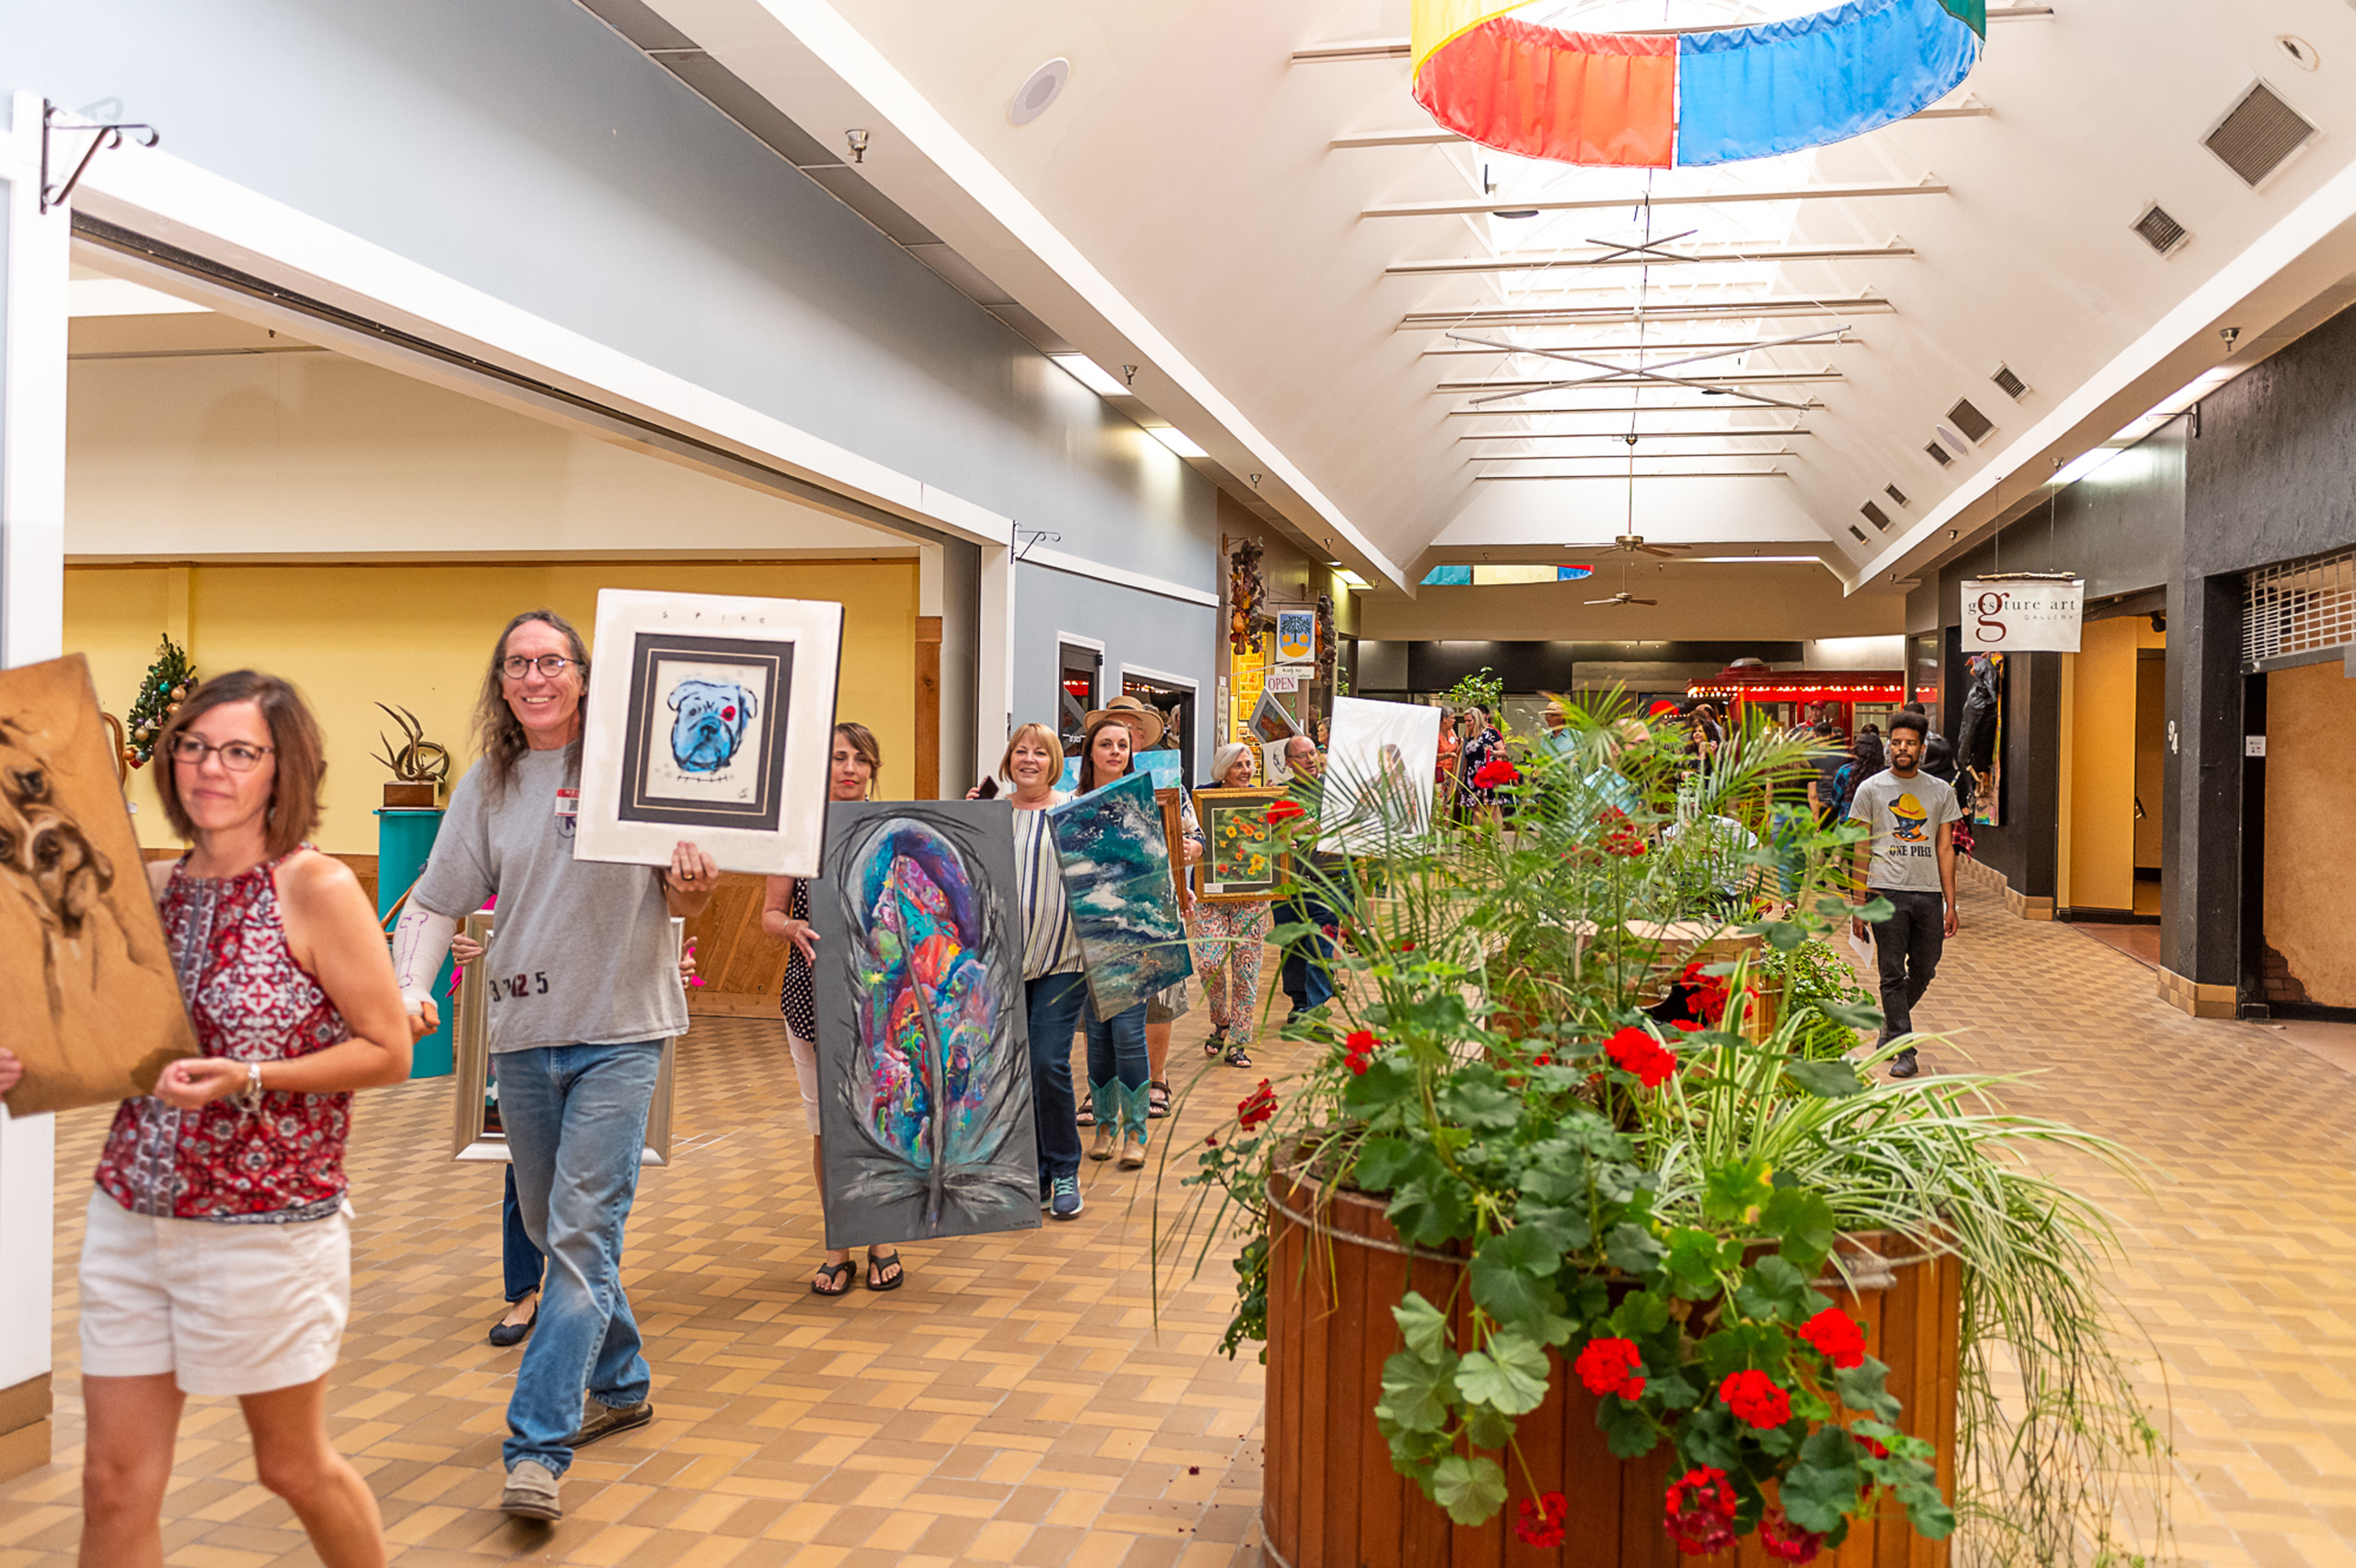 Artists and visitors parade down the halls of the Sunset Center on August 2.